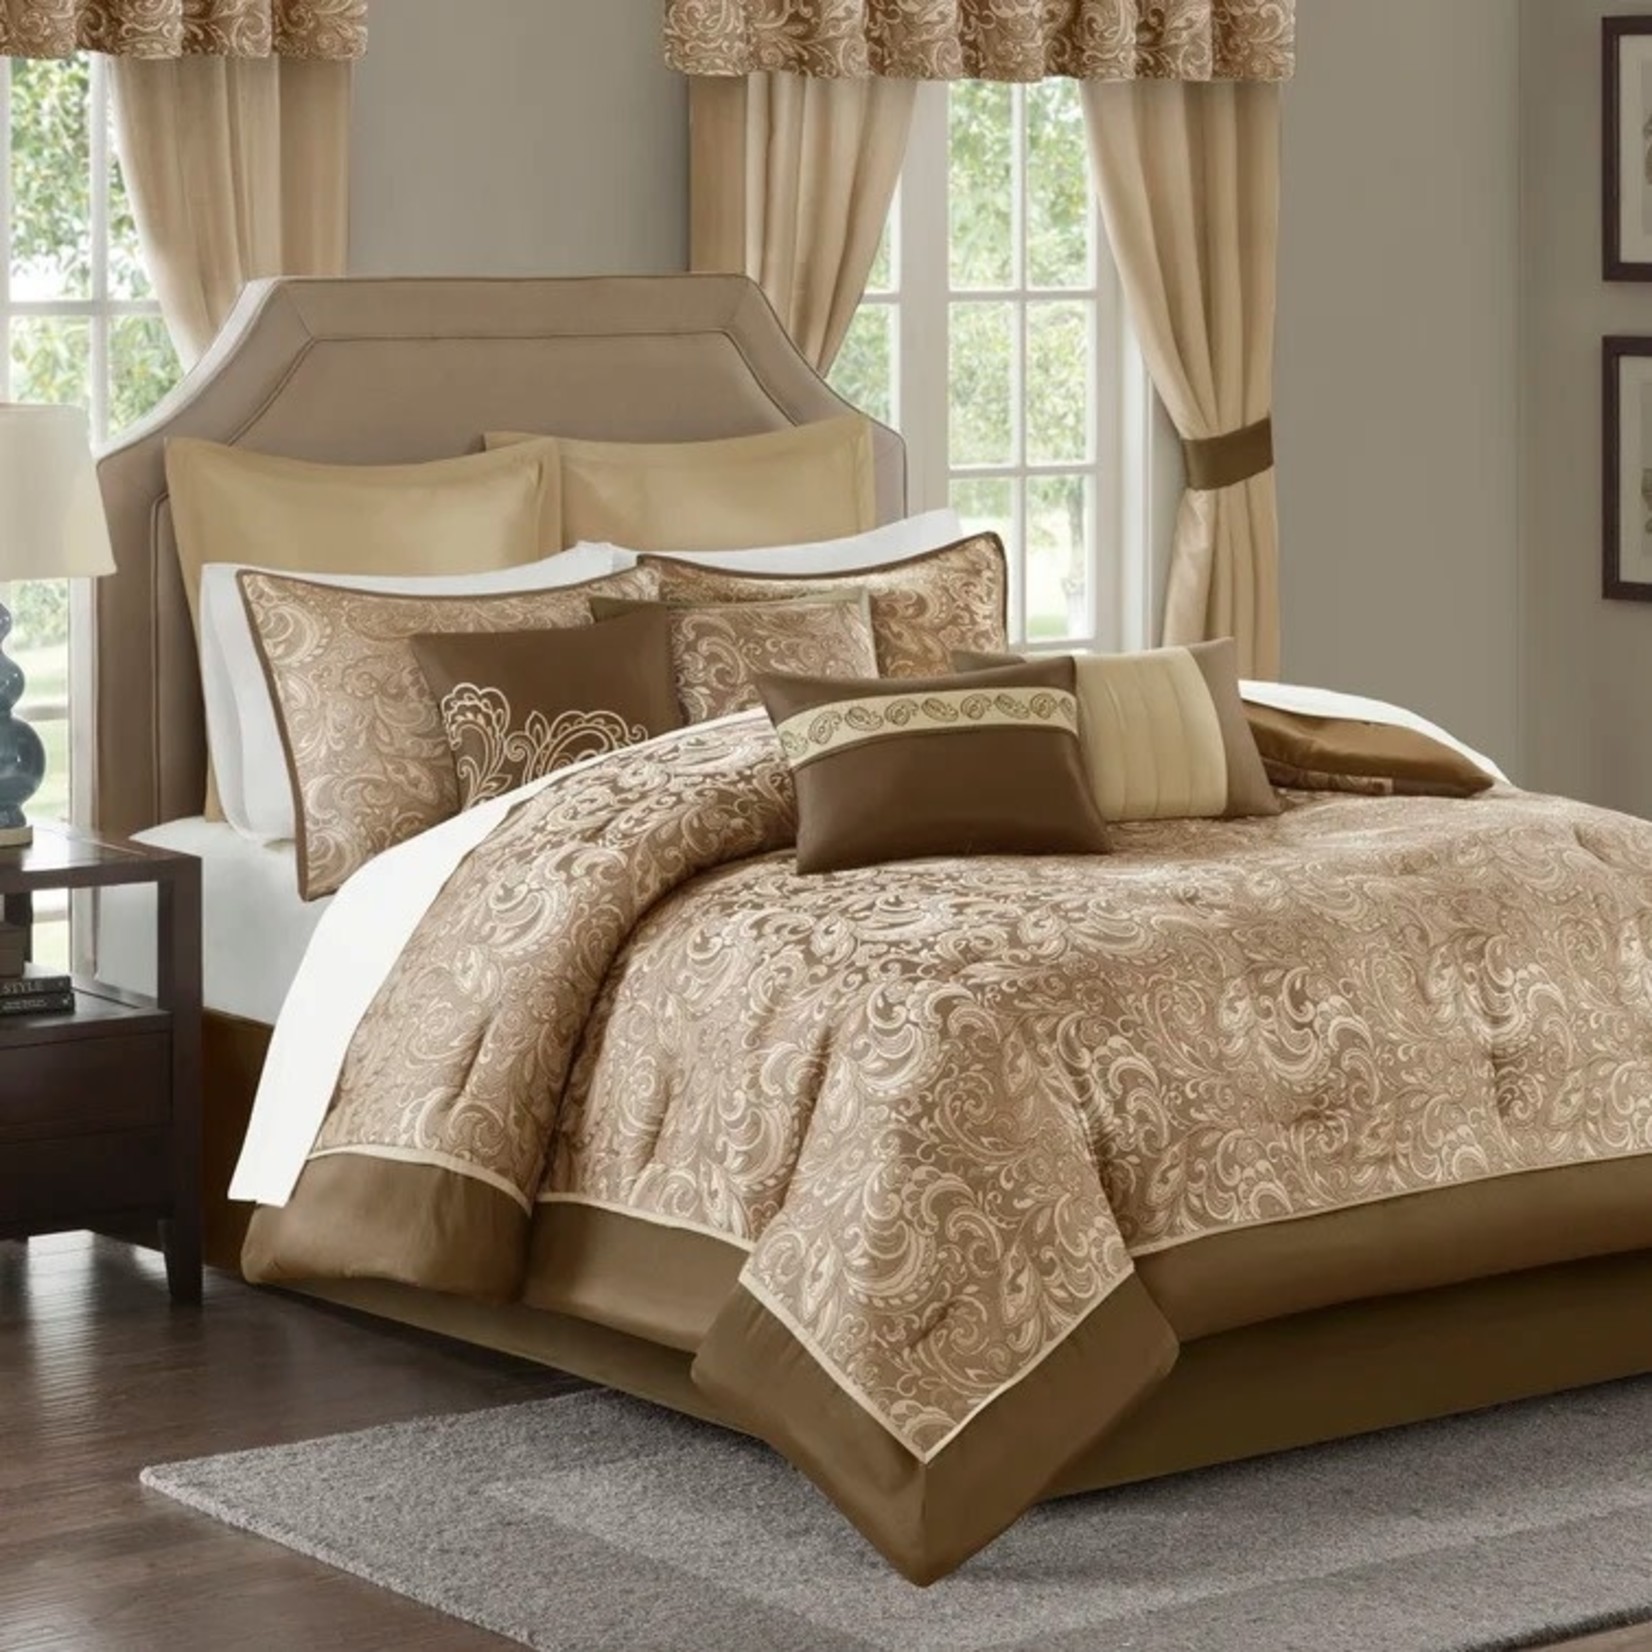 *Cal King - Wightmans Paisley 24 Piece Comforter Bed-in-a-bag - Brown - Final Sale